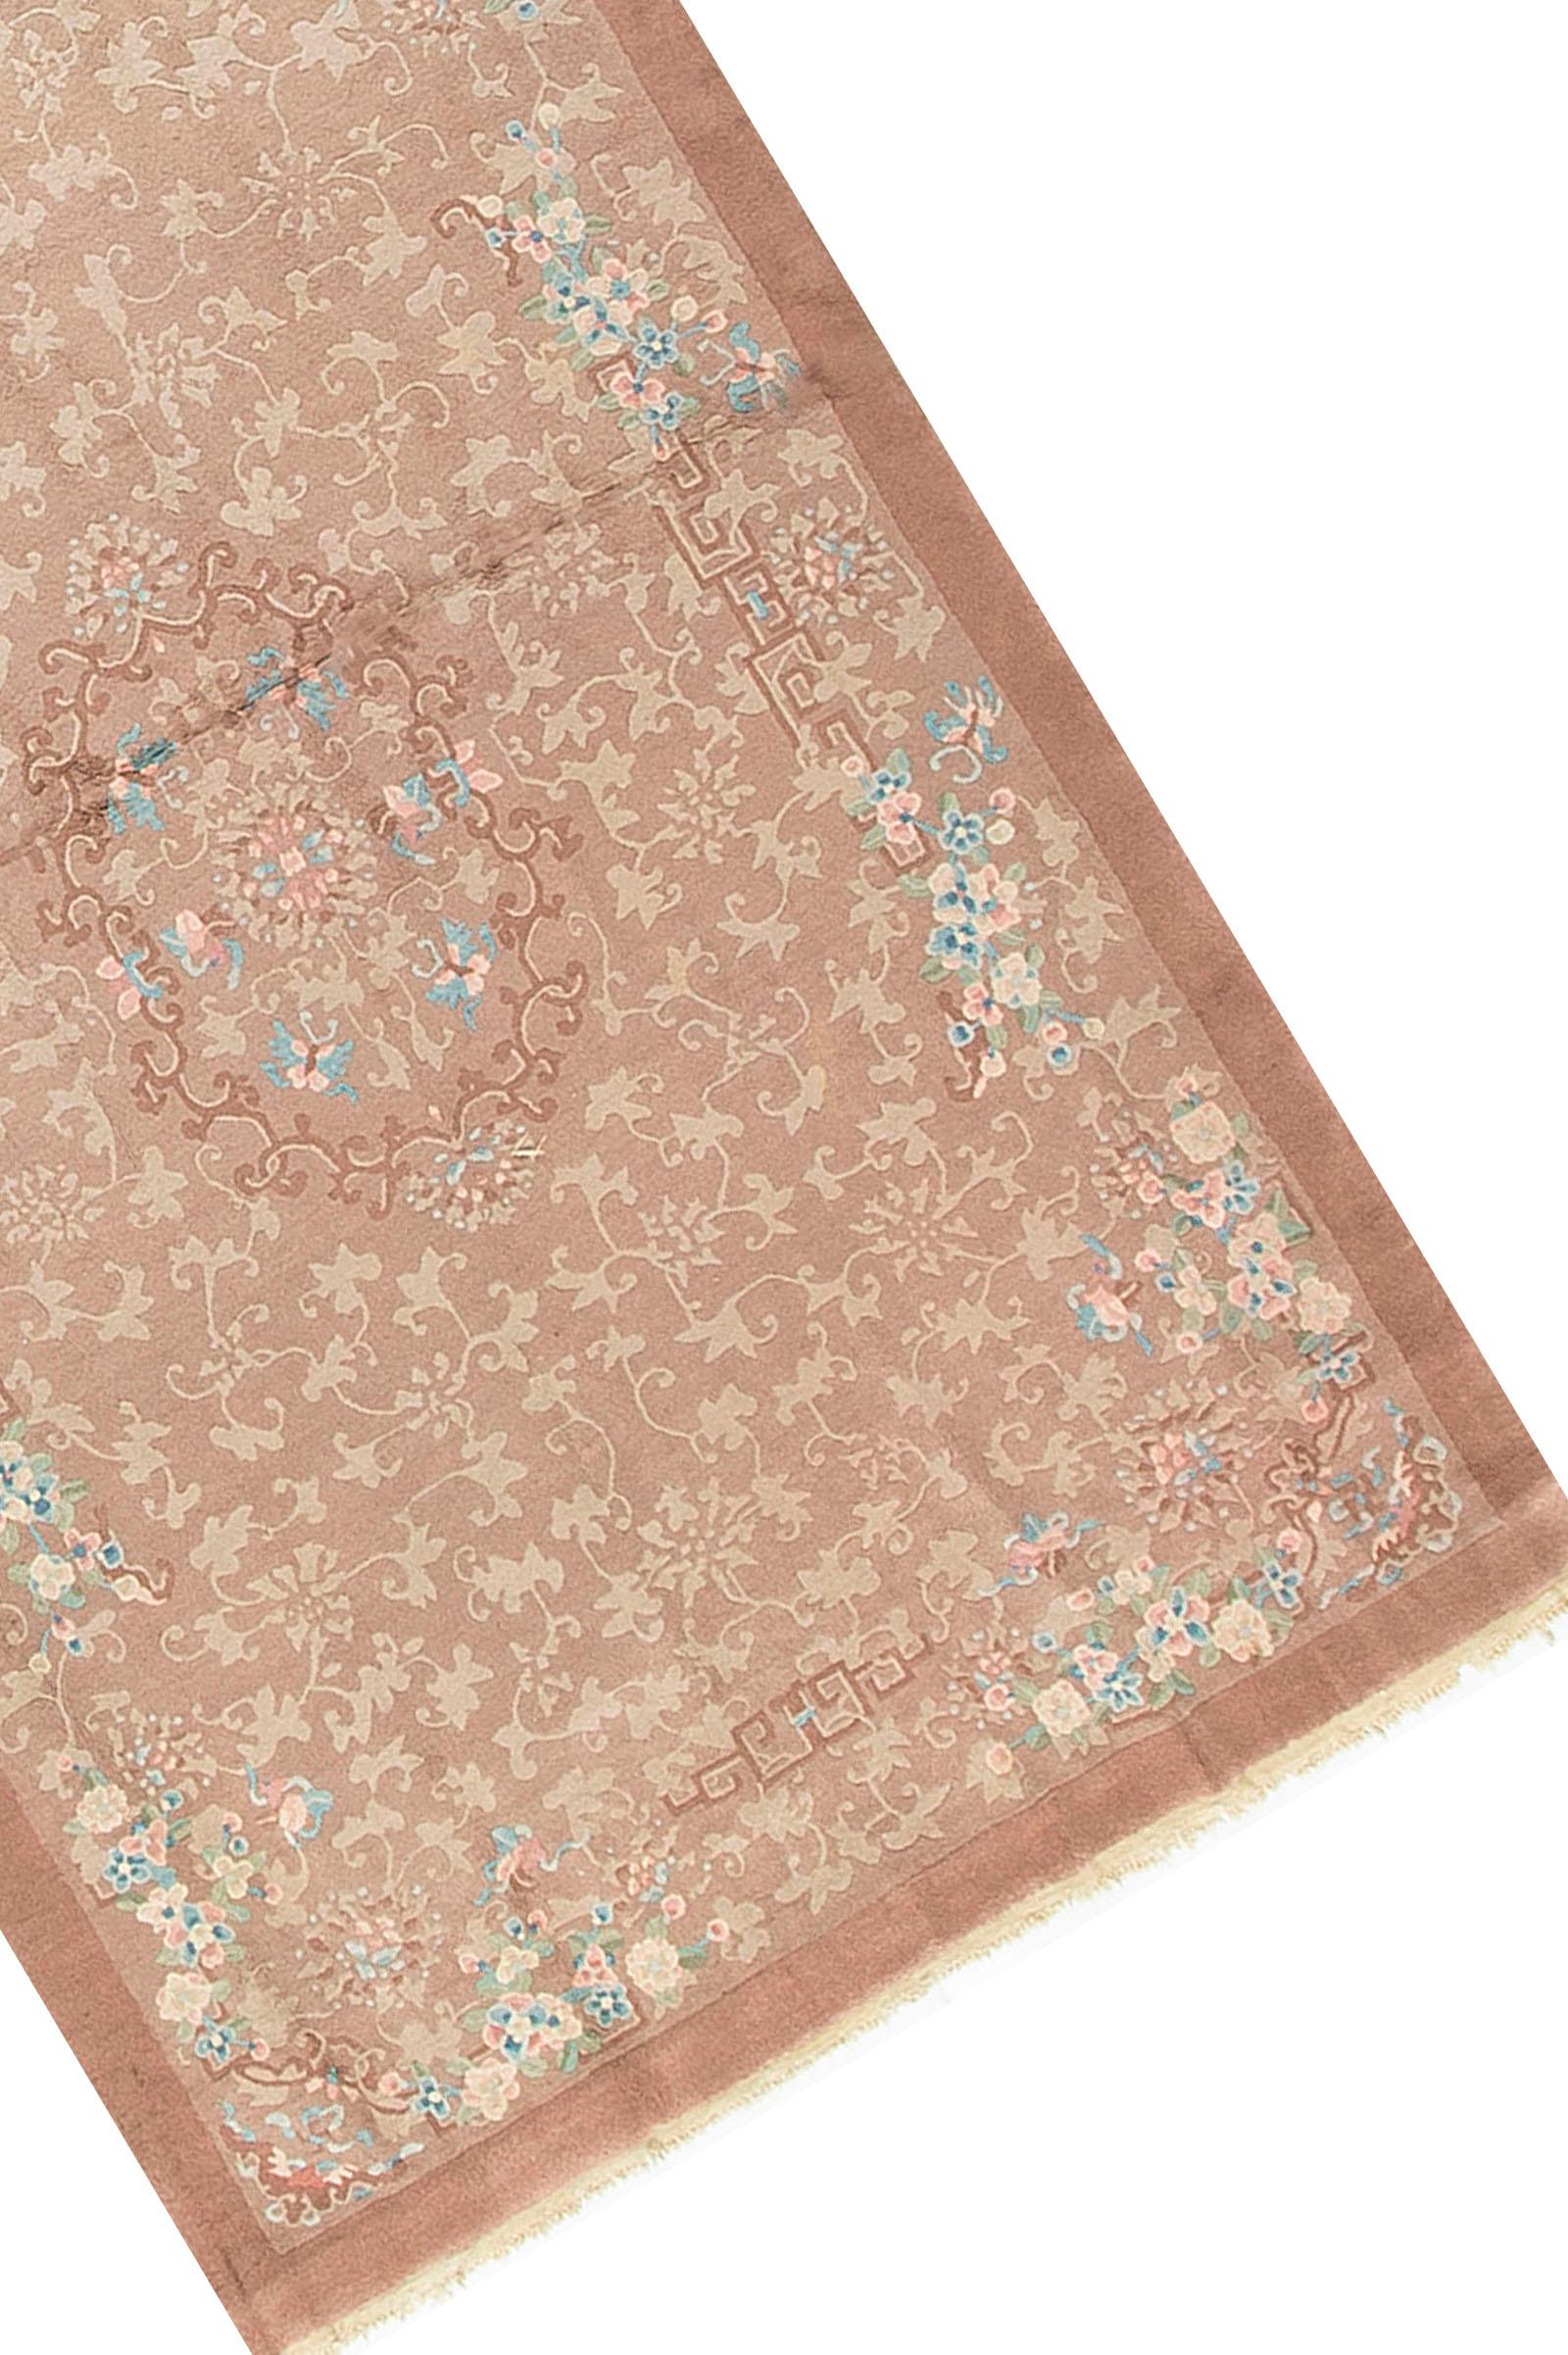 Vintage Chinese rug, circa 1940.Chinese handwoven rug with a soft peach ground, the corner spandrels with a floral design matching the central motif, this theme is expanded into the two main borders in a light and slightly darker shade to give the